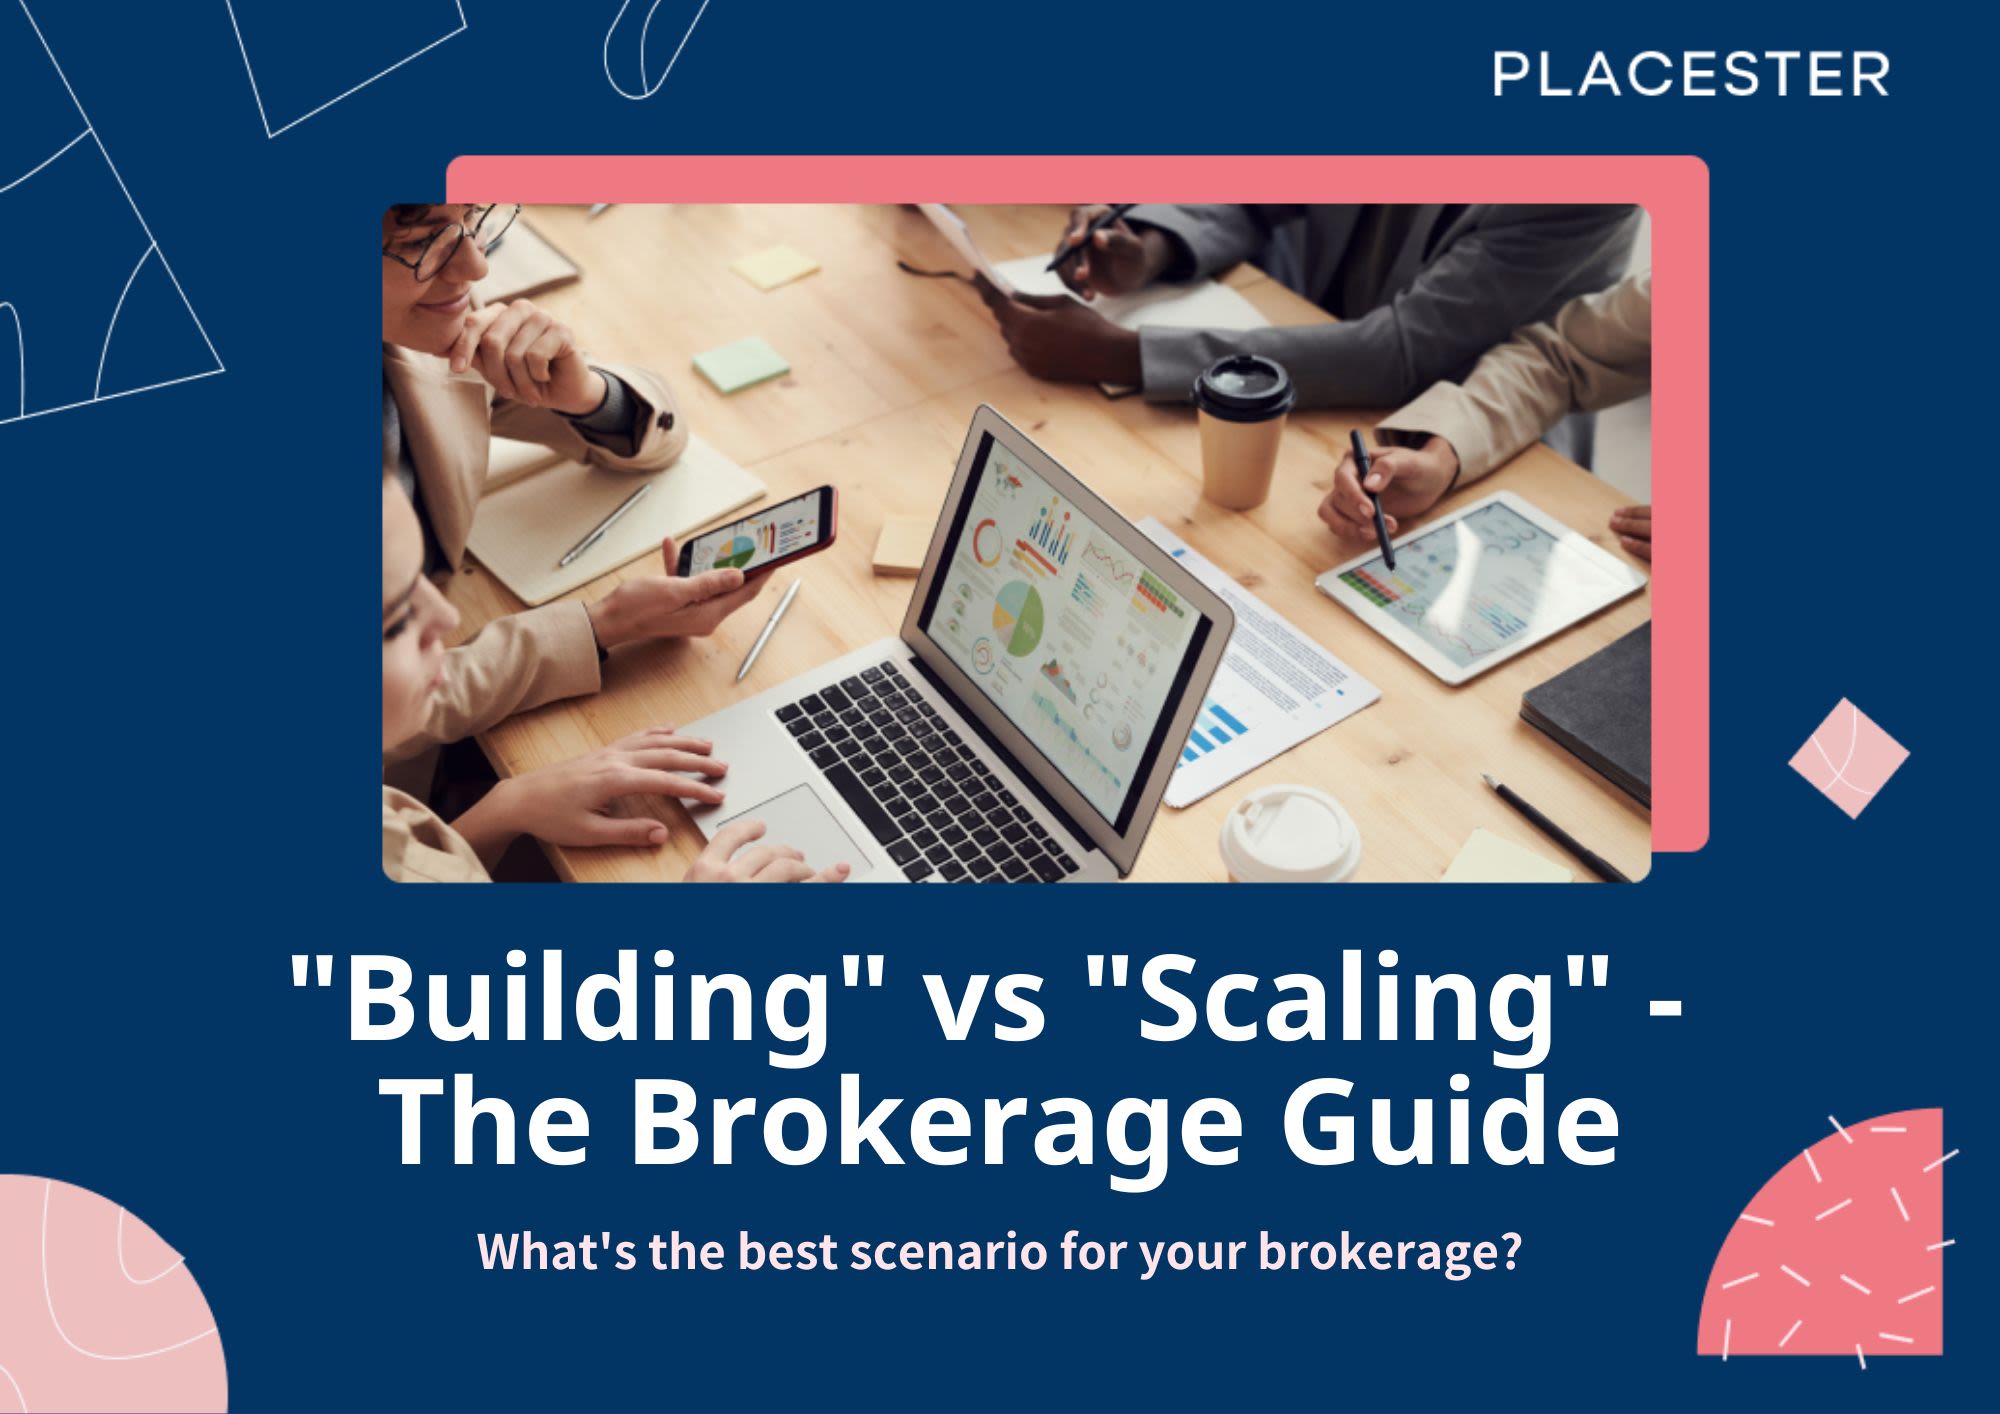  "Building" vs "Scaling" - The Brokerage Guide